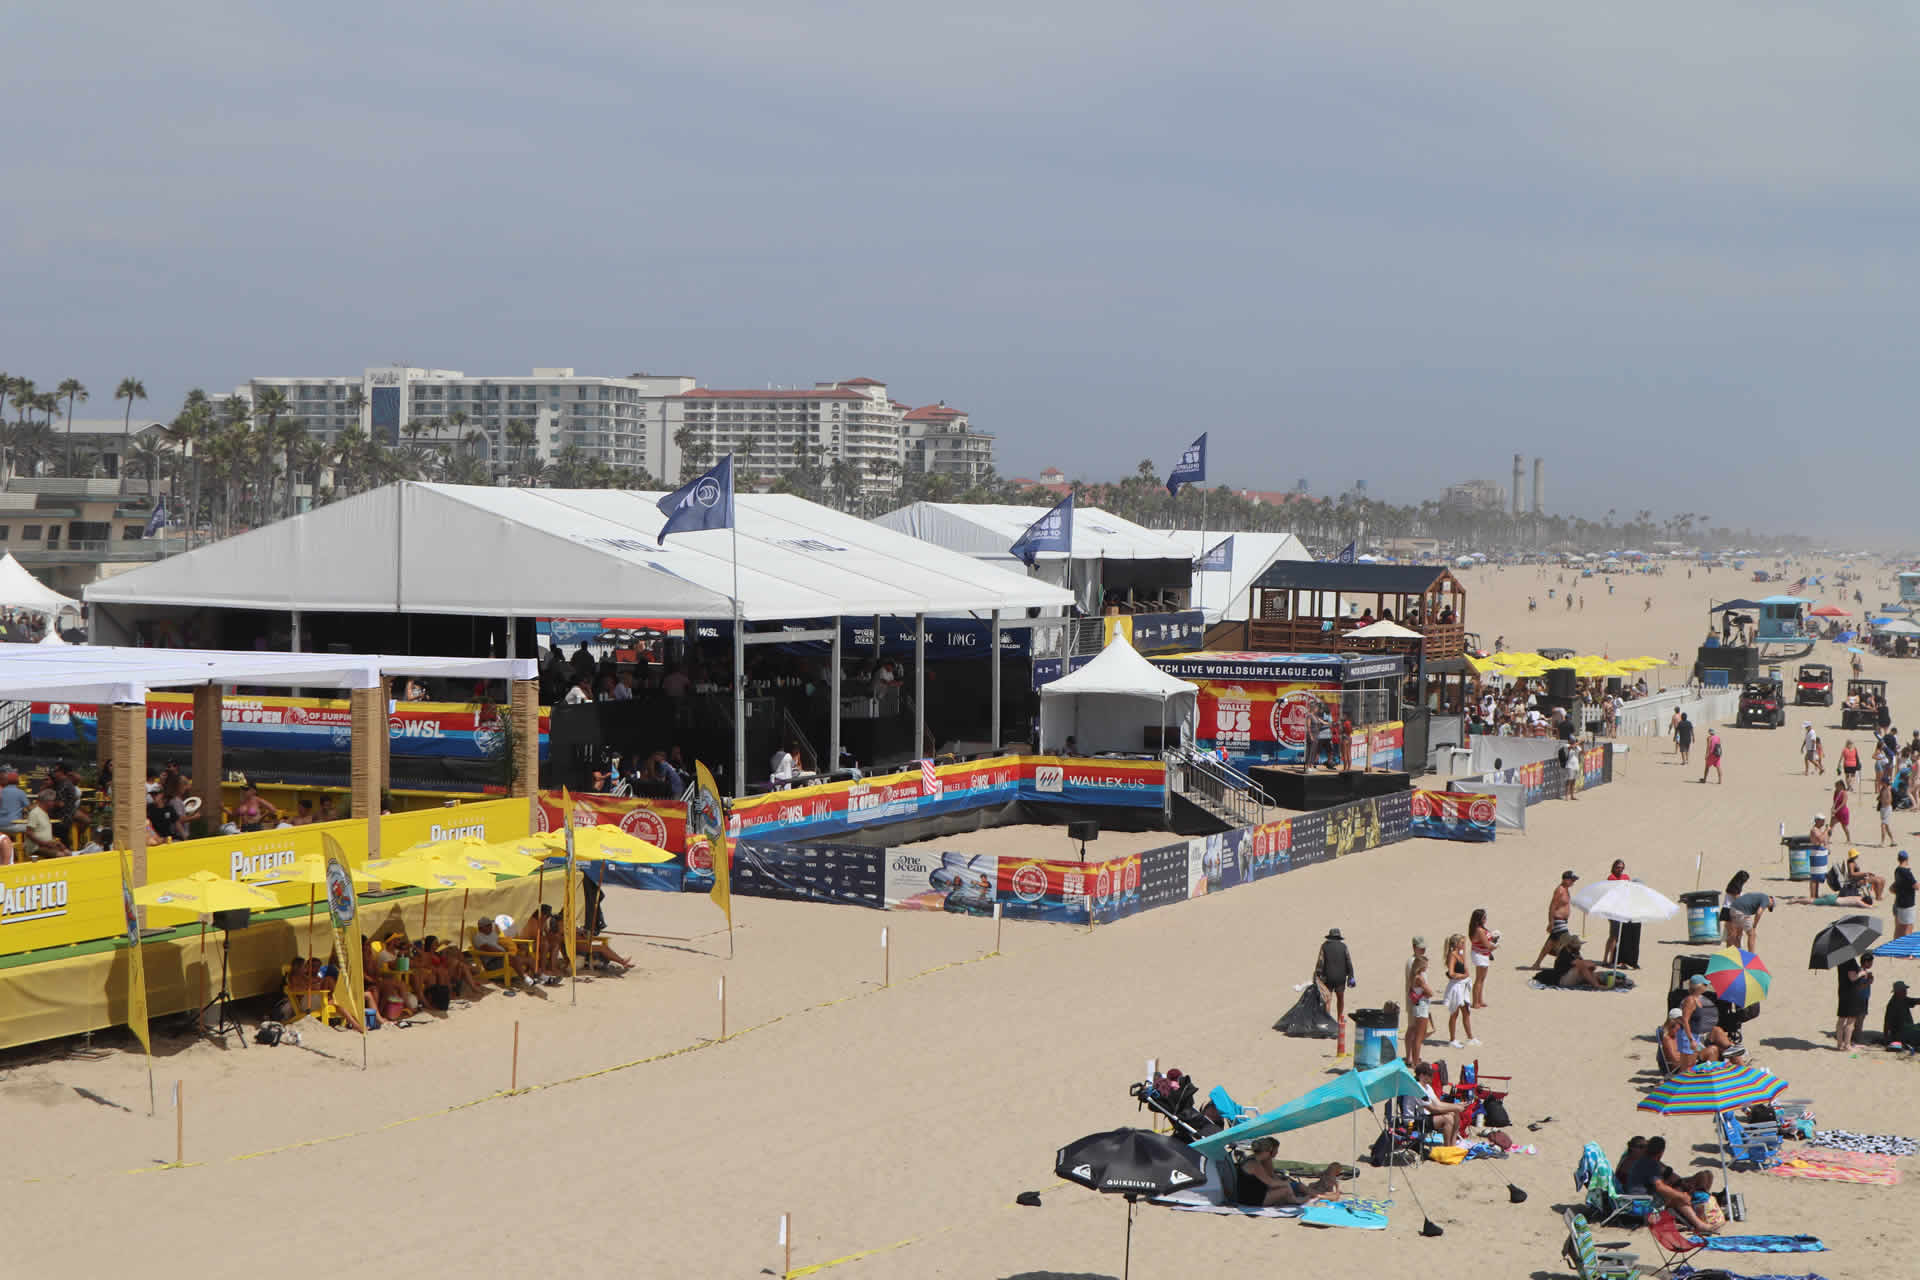 Creating an engaging event at the WSL US Open of Surf